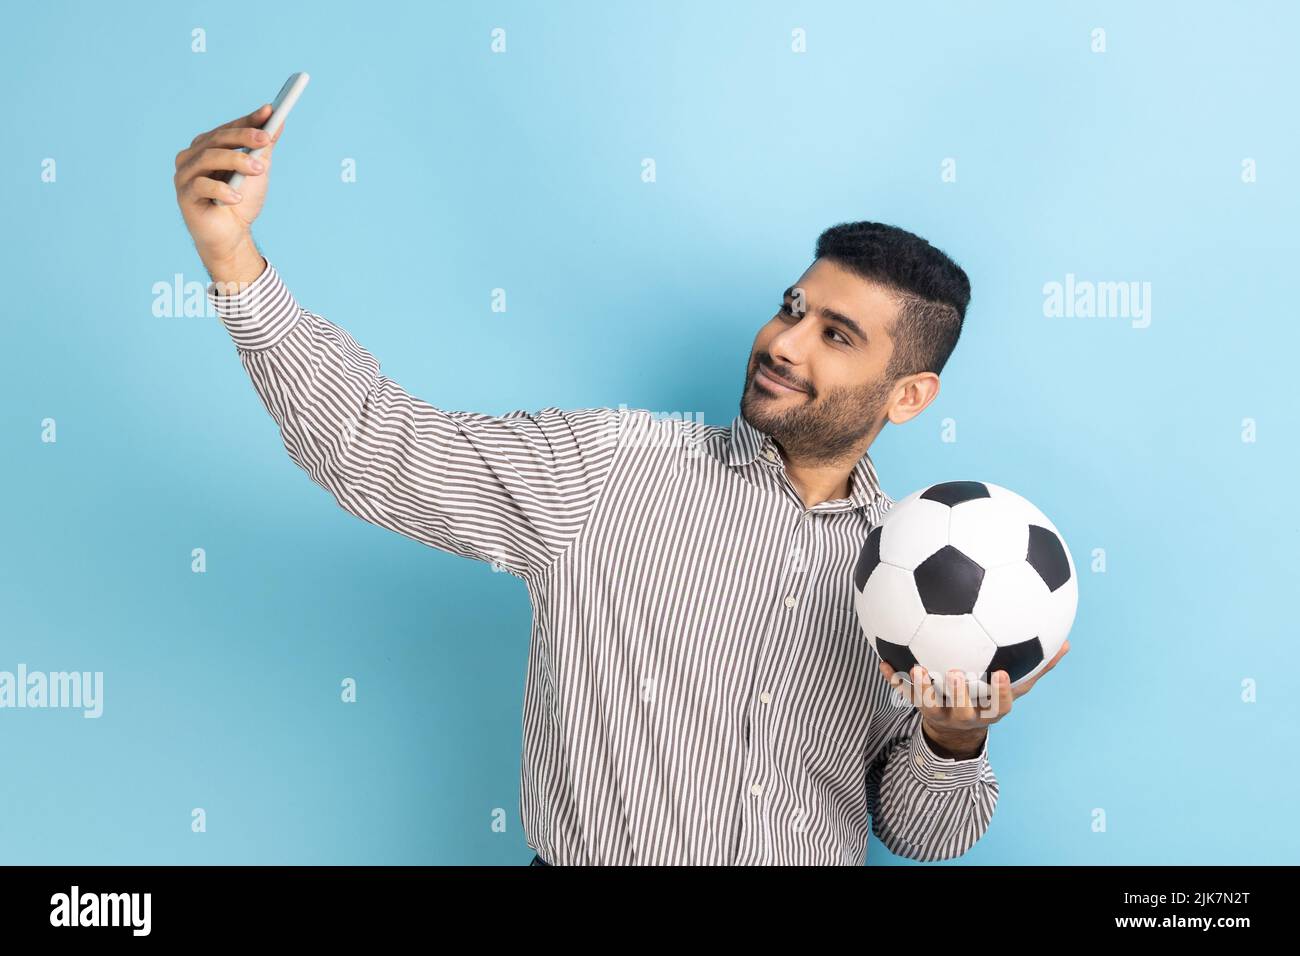 Young adult attractive businessman making selfie, having video call or broadcasting livestream with ball in hand, wearing striped shirt. Indoor studio shot isolated on blue background. Stock Photo